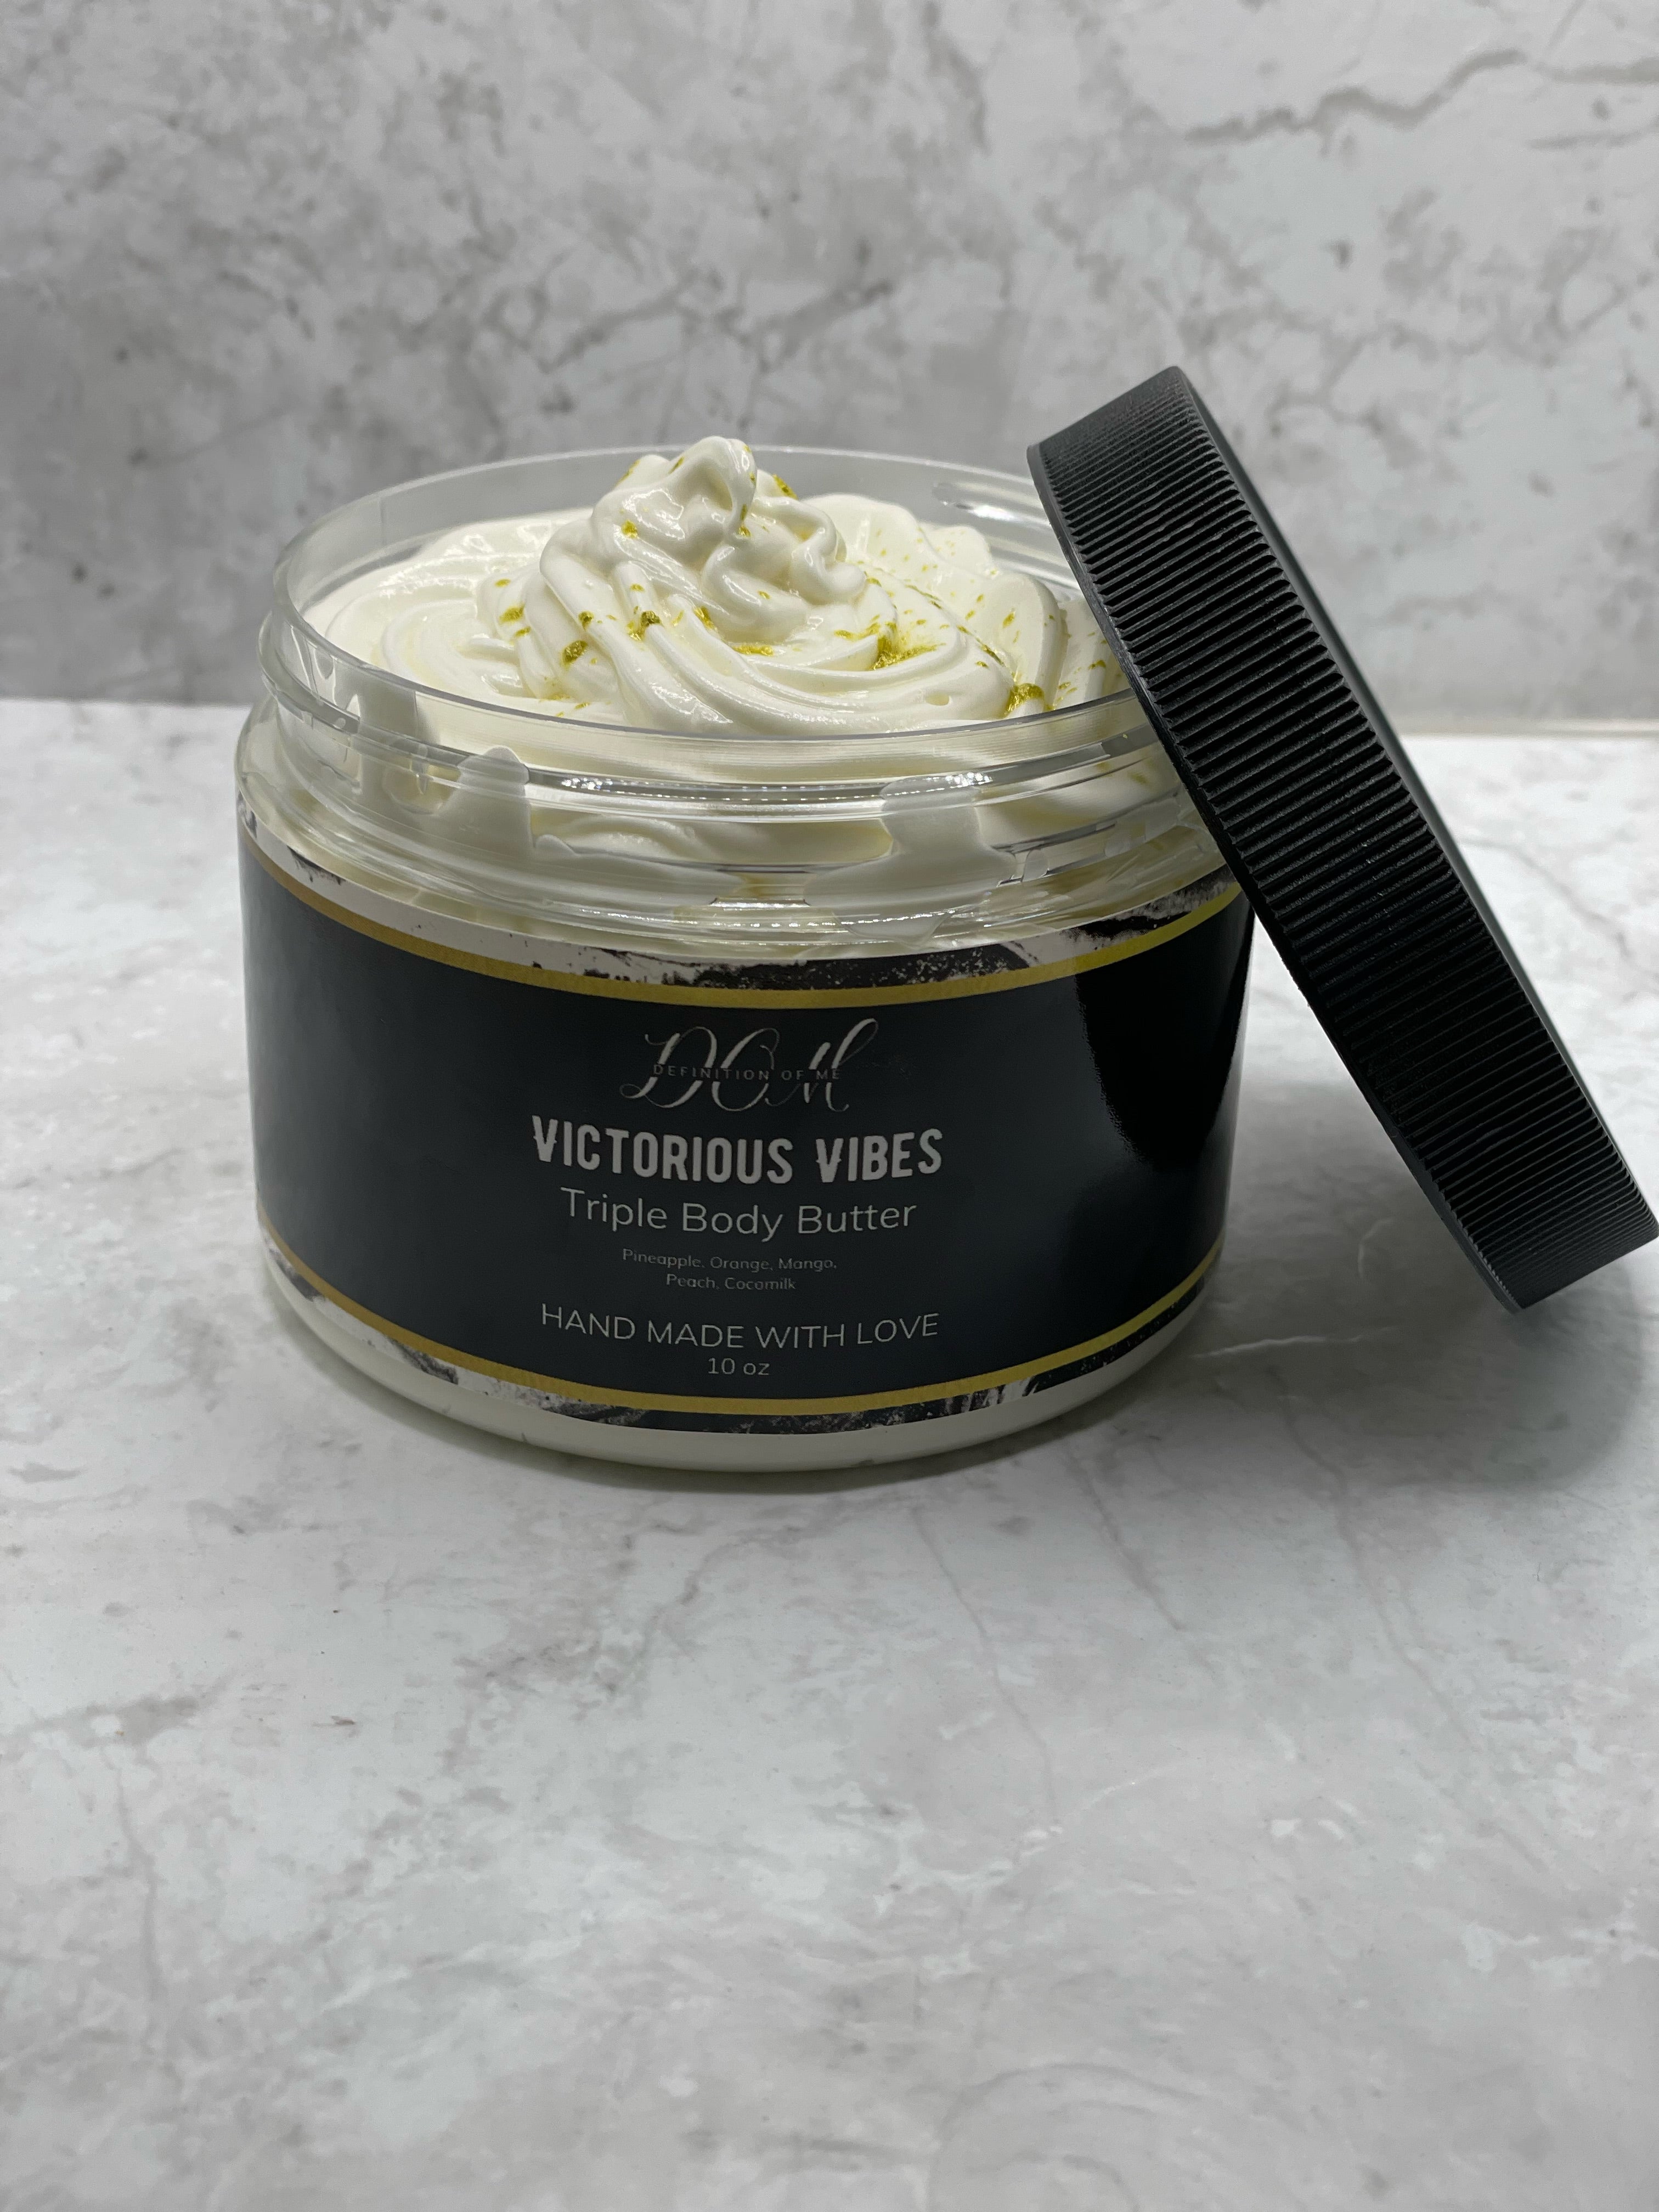 Whipped Body Butter: Victorious Vibes